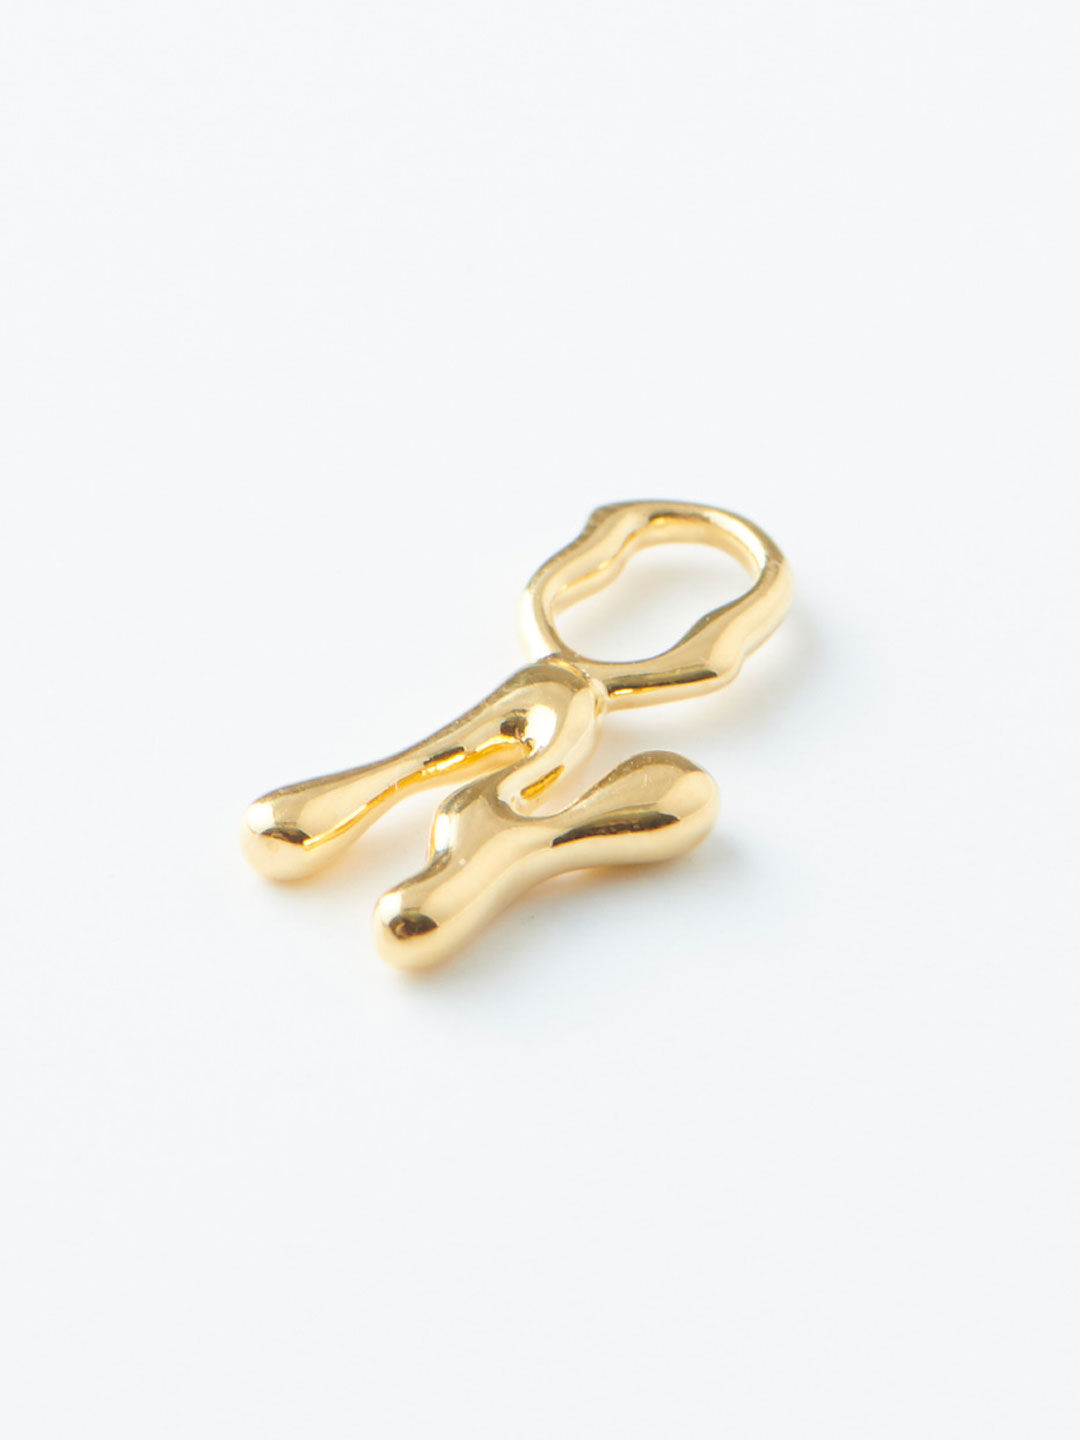 Fluent Letter N Charm - Yellow Gold